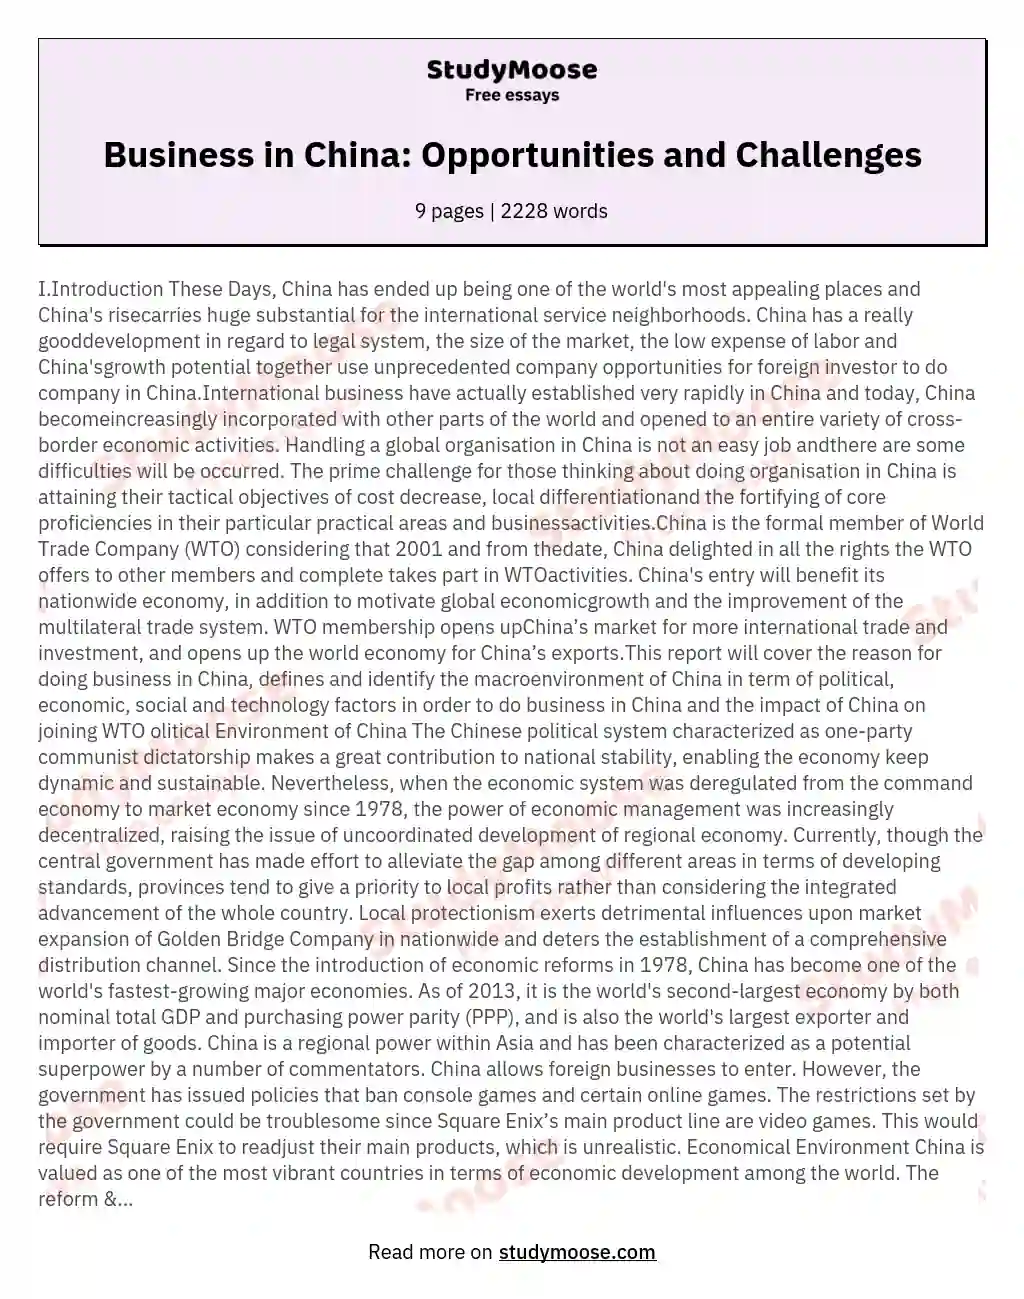 Business in China: Opportunities and Challenges essay